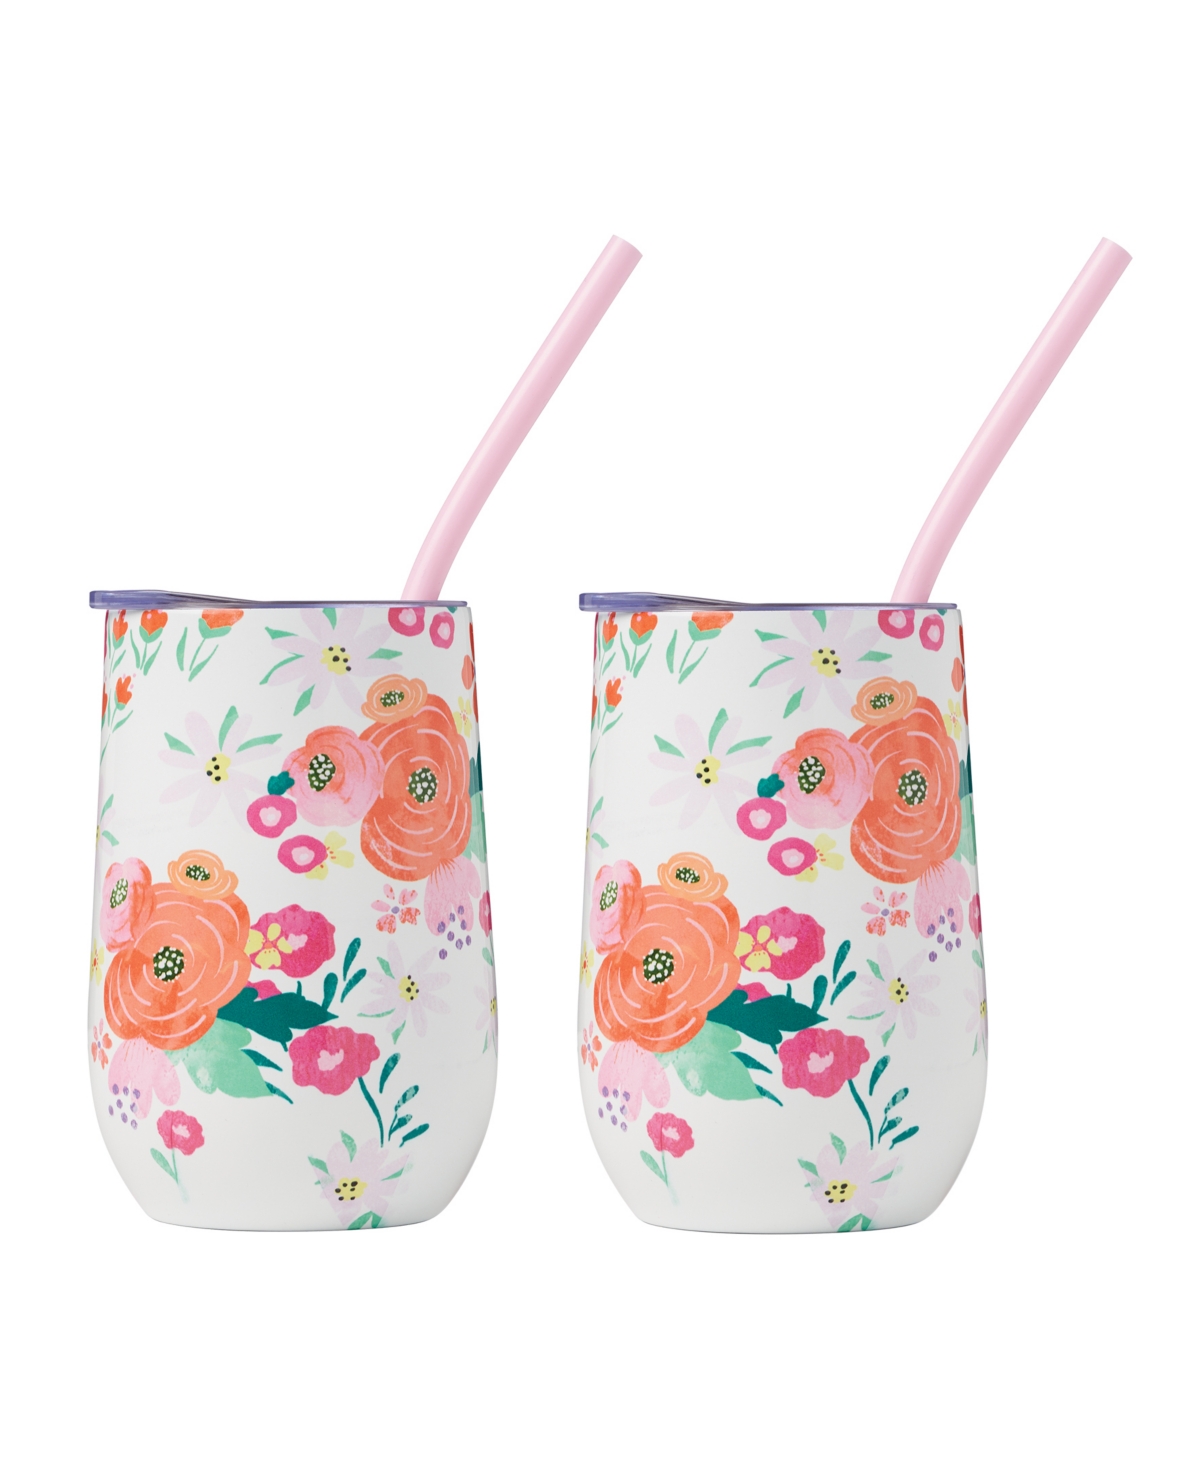 Cambridge 16 oz Pink Floral Insulated Wine Tumbler, Set Of 2 In Multi